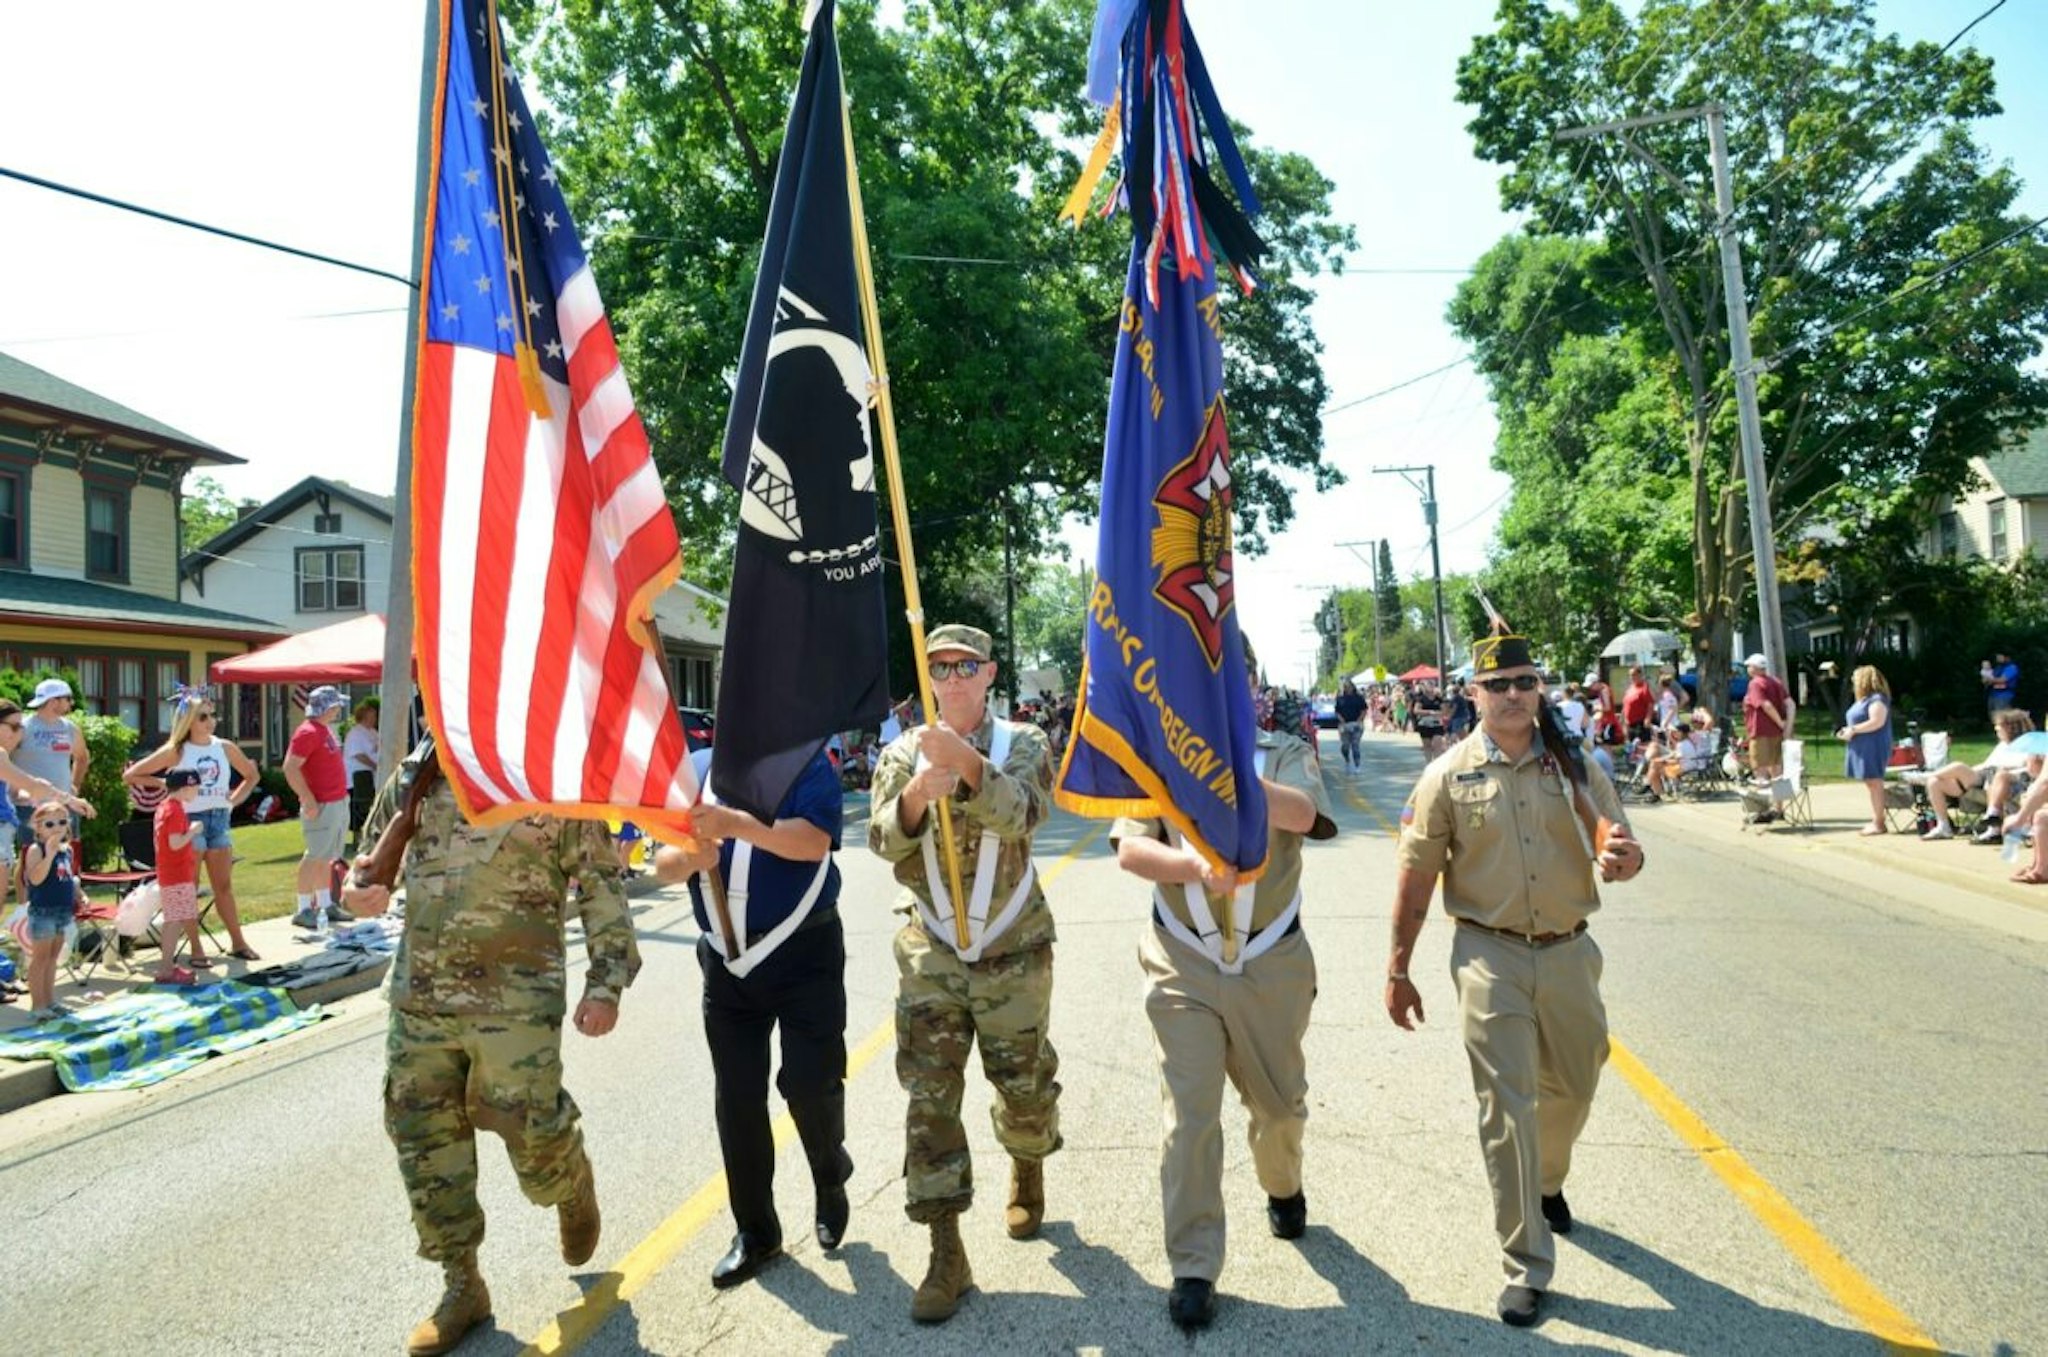 ANTIOCH, ILLINOIS, UNITED STATES - JULY 4: The annual 4th of July Parade travels through the district of Antioch, Illinois, United States on July 4, 2023.